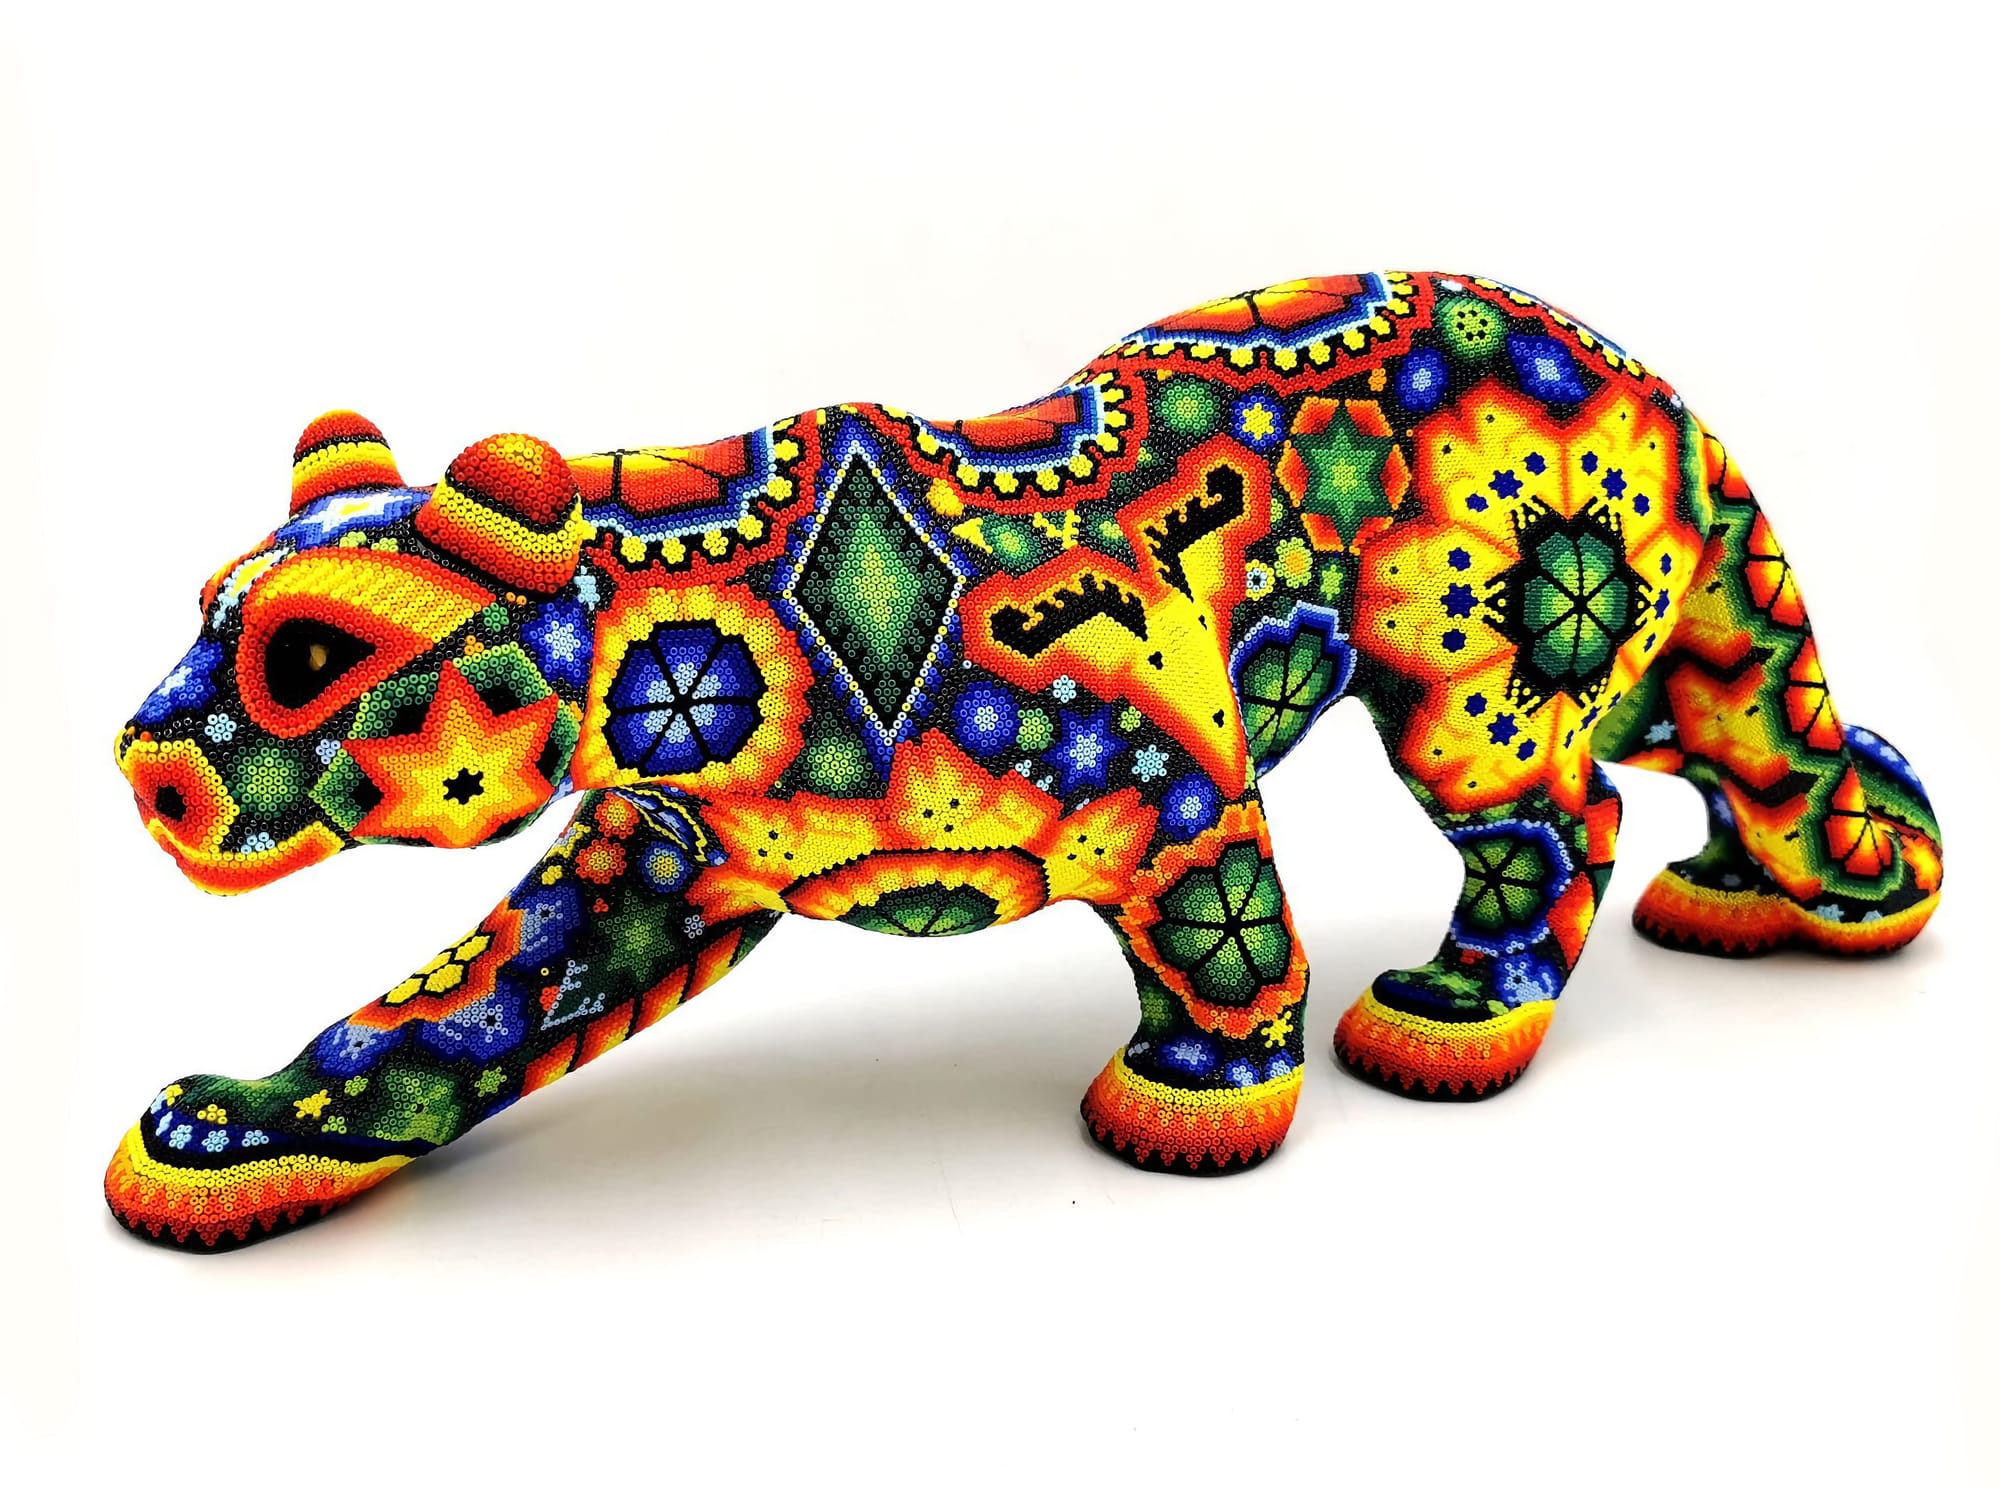 Huichol inspired Jaguar figure in resin decorated with glass beads by Espacio Kanuwa